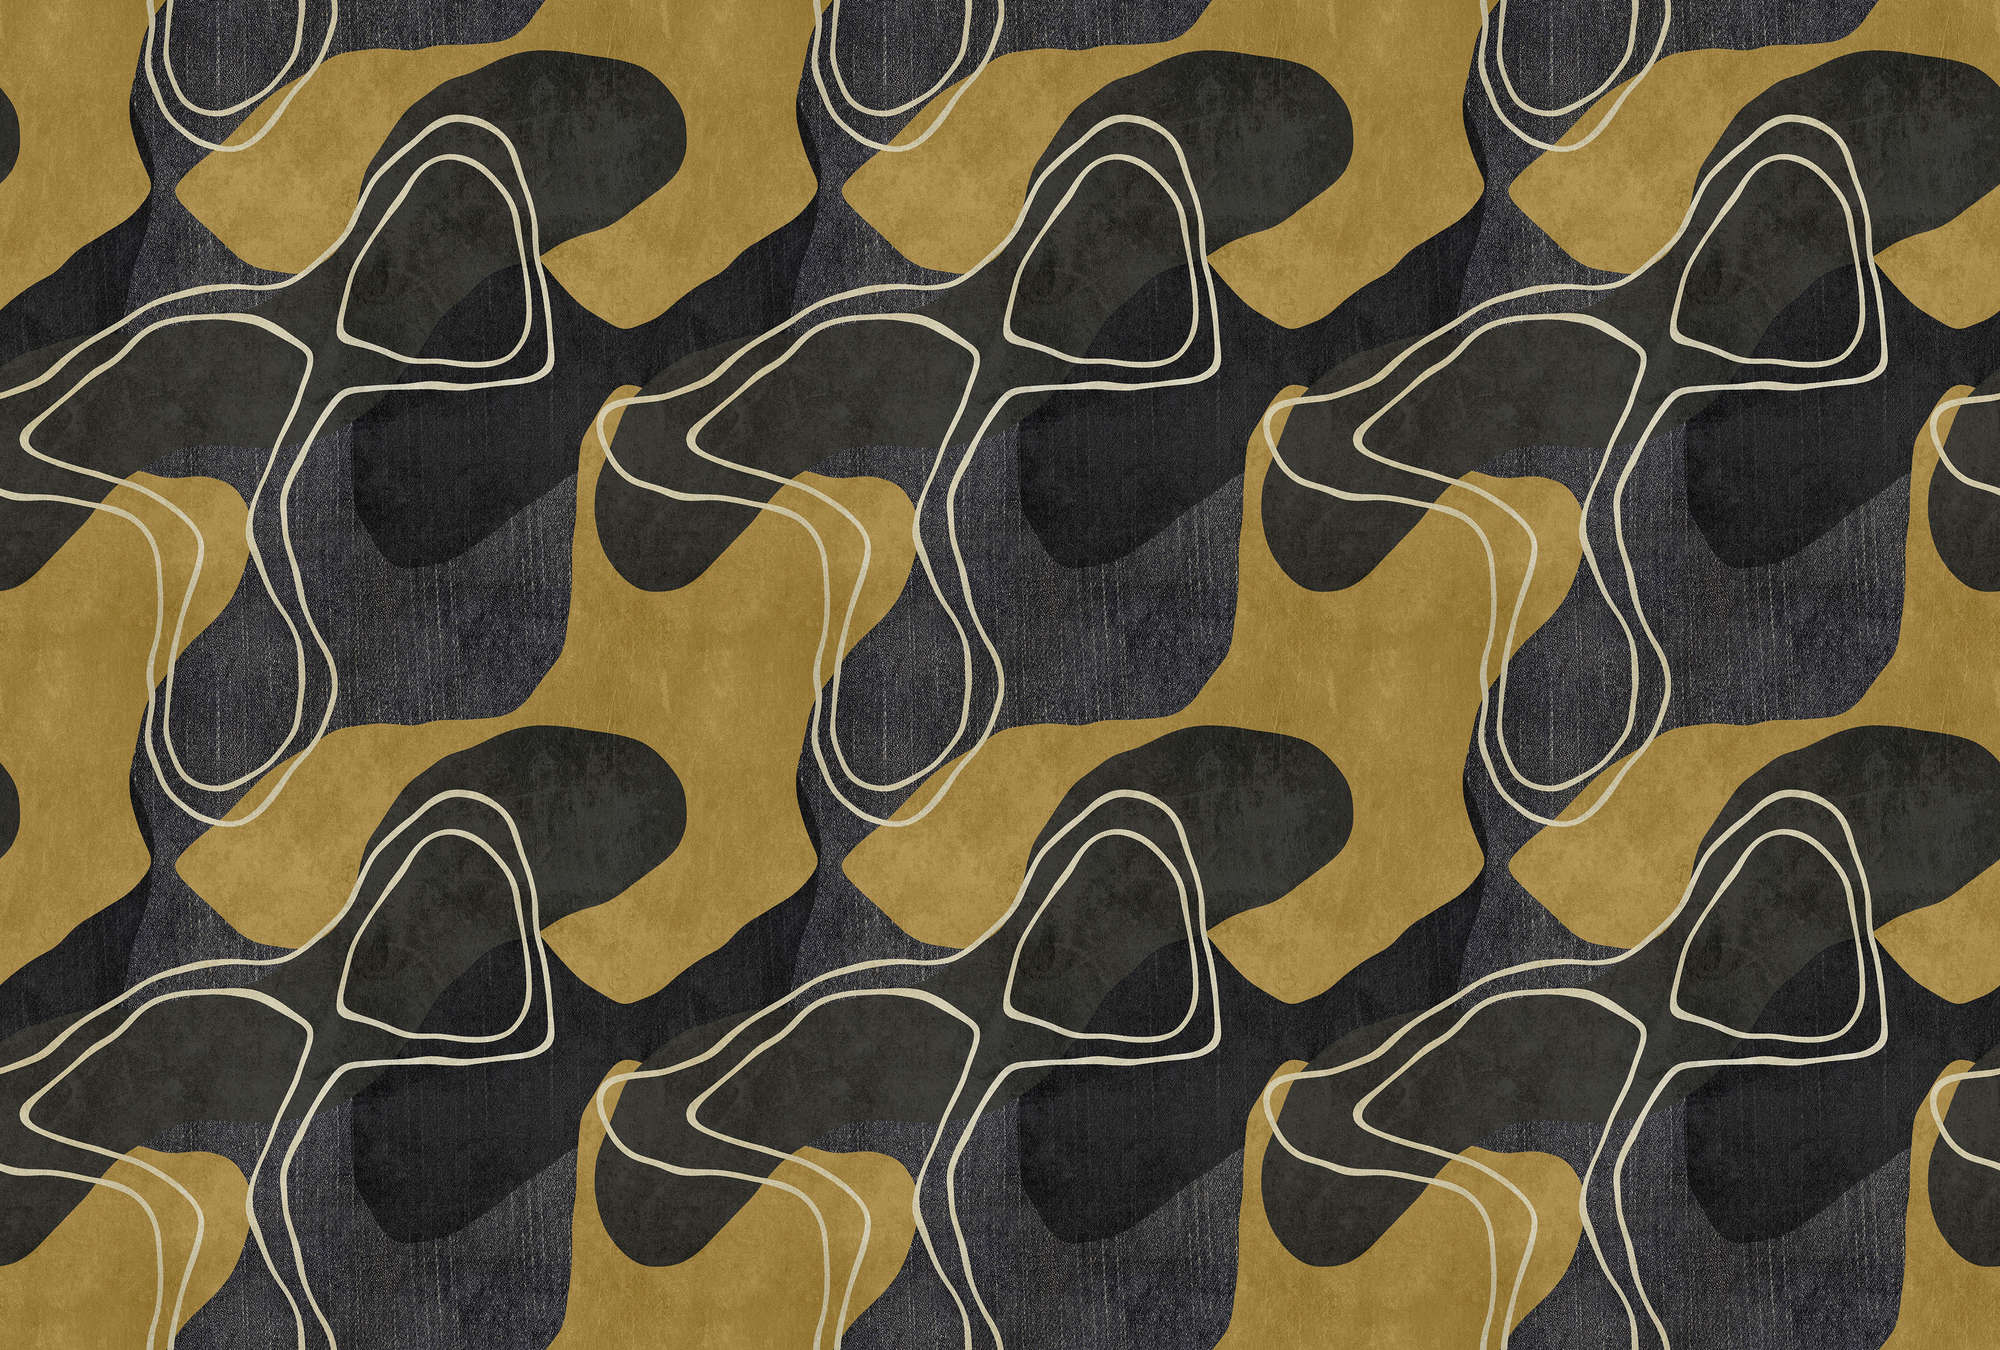             Terra 2 - Abstract photo wallpaper ethnic pattern in natural colours
        